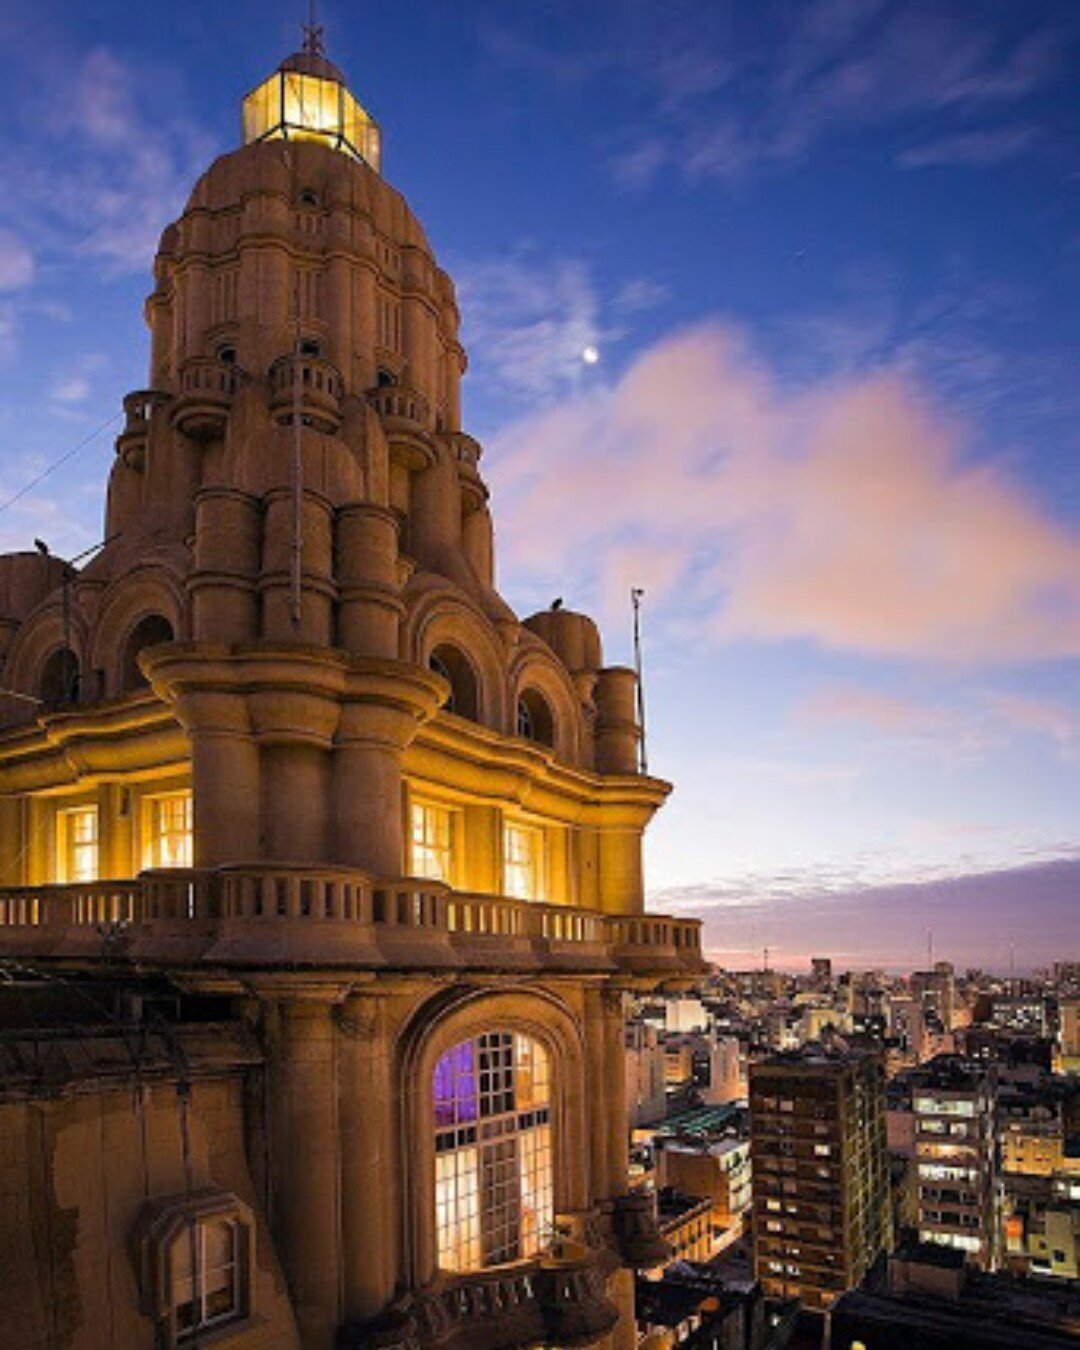 Palacio Barolo is a landmark office building, located in the neighborhood of Montserrat, Buenos Aires. Declared a national historic monument in 1997, it is a hotspot for tourists as its design was inspired by Dante's 'Divine Comedy'. 

🏛️🇦🇷📚

#im